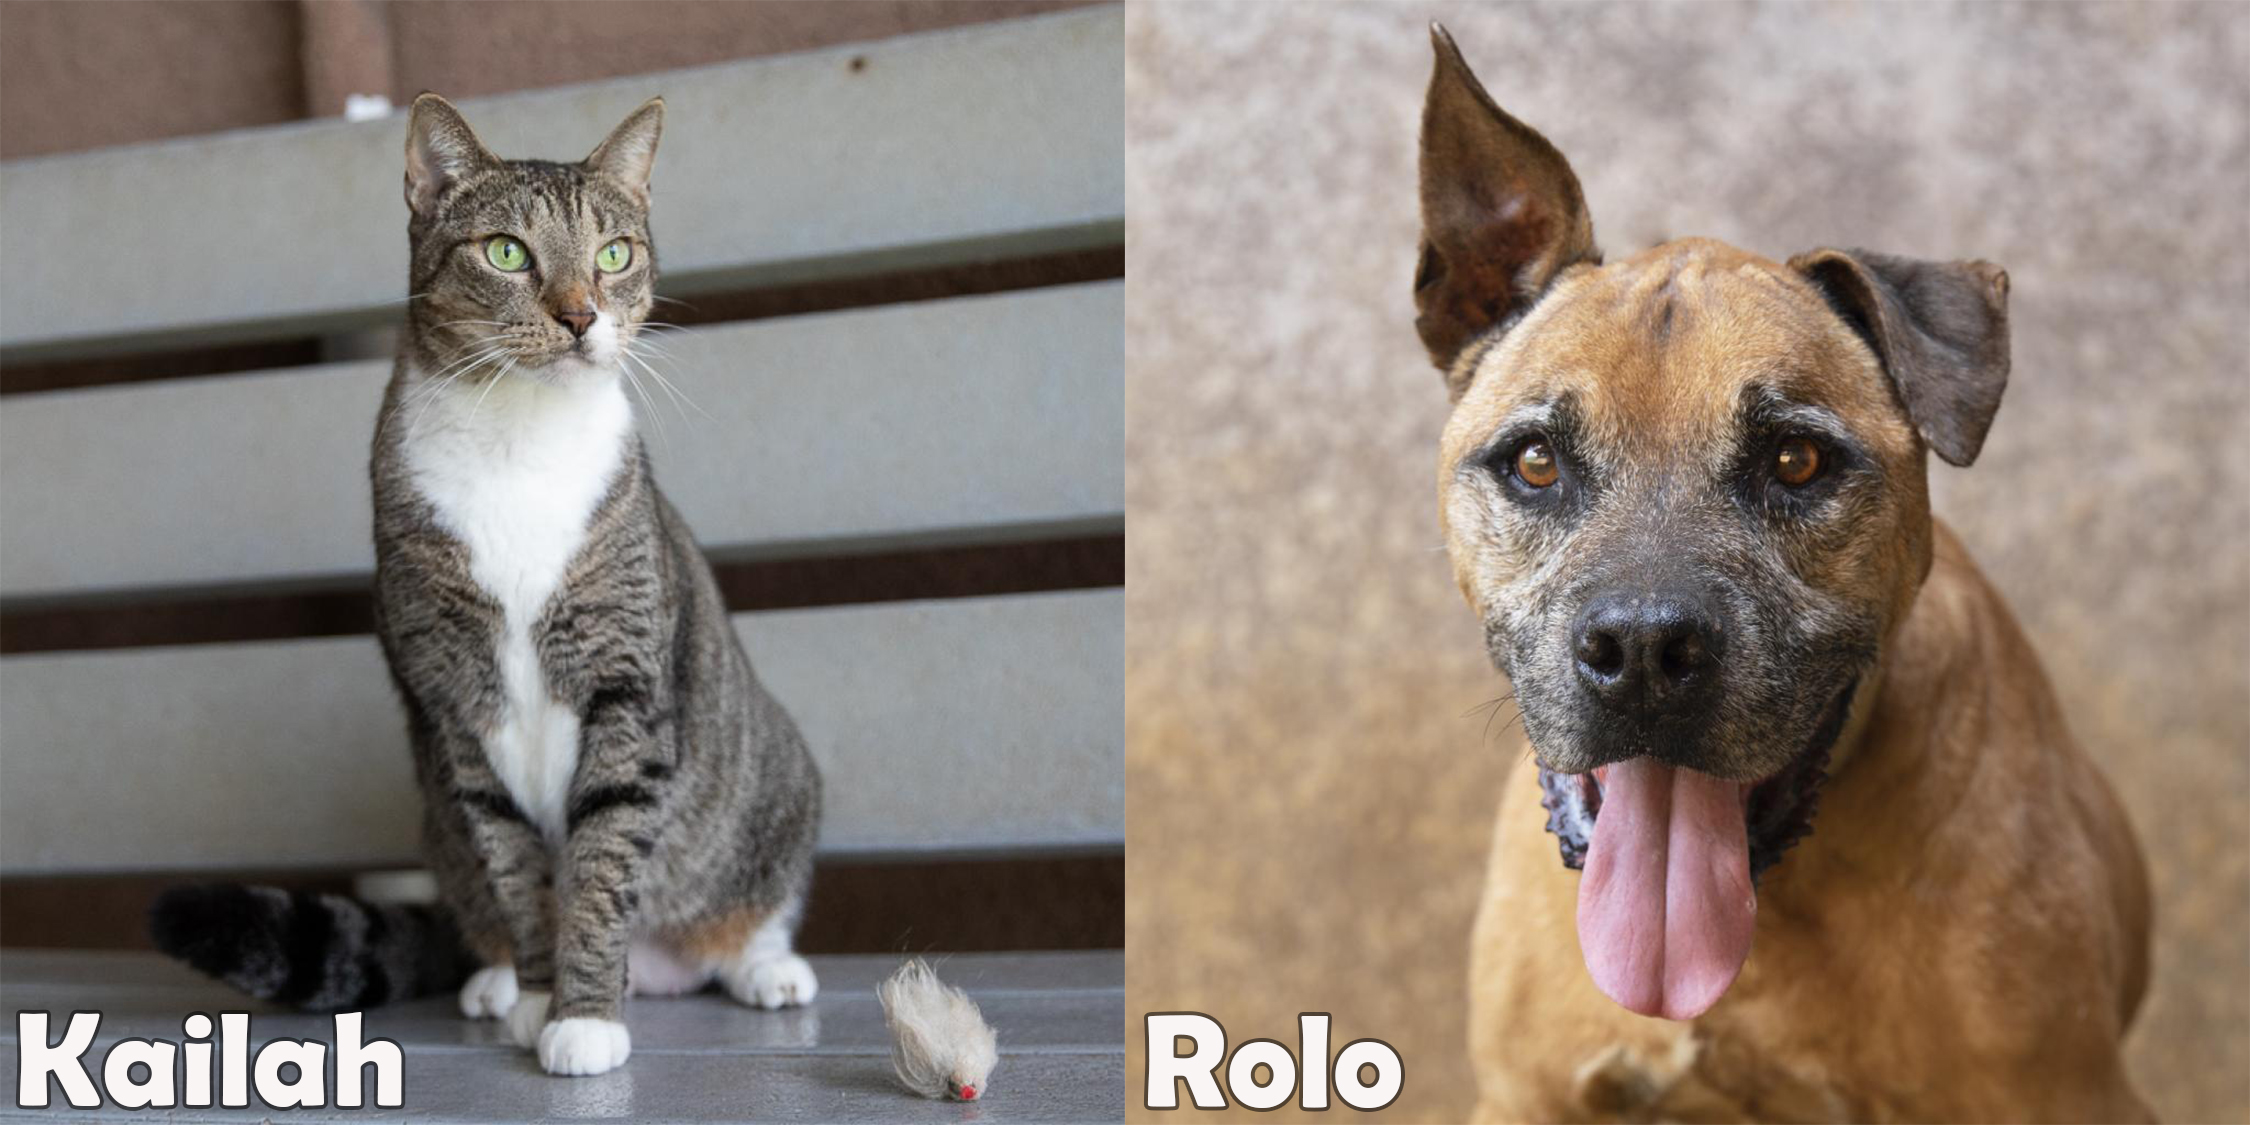 Featured Pets this month are Kailah and Rolo!